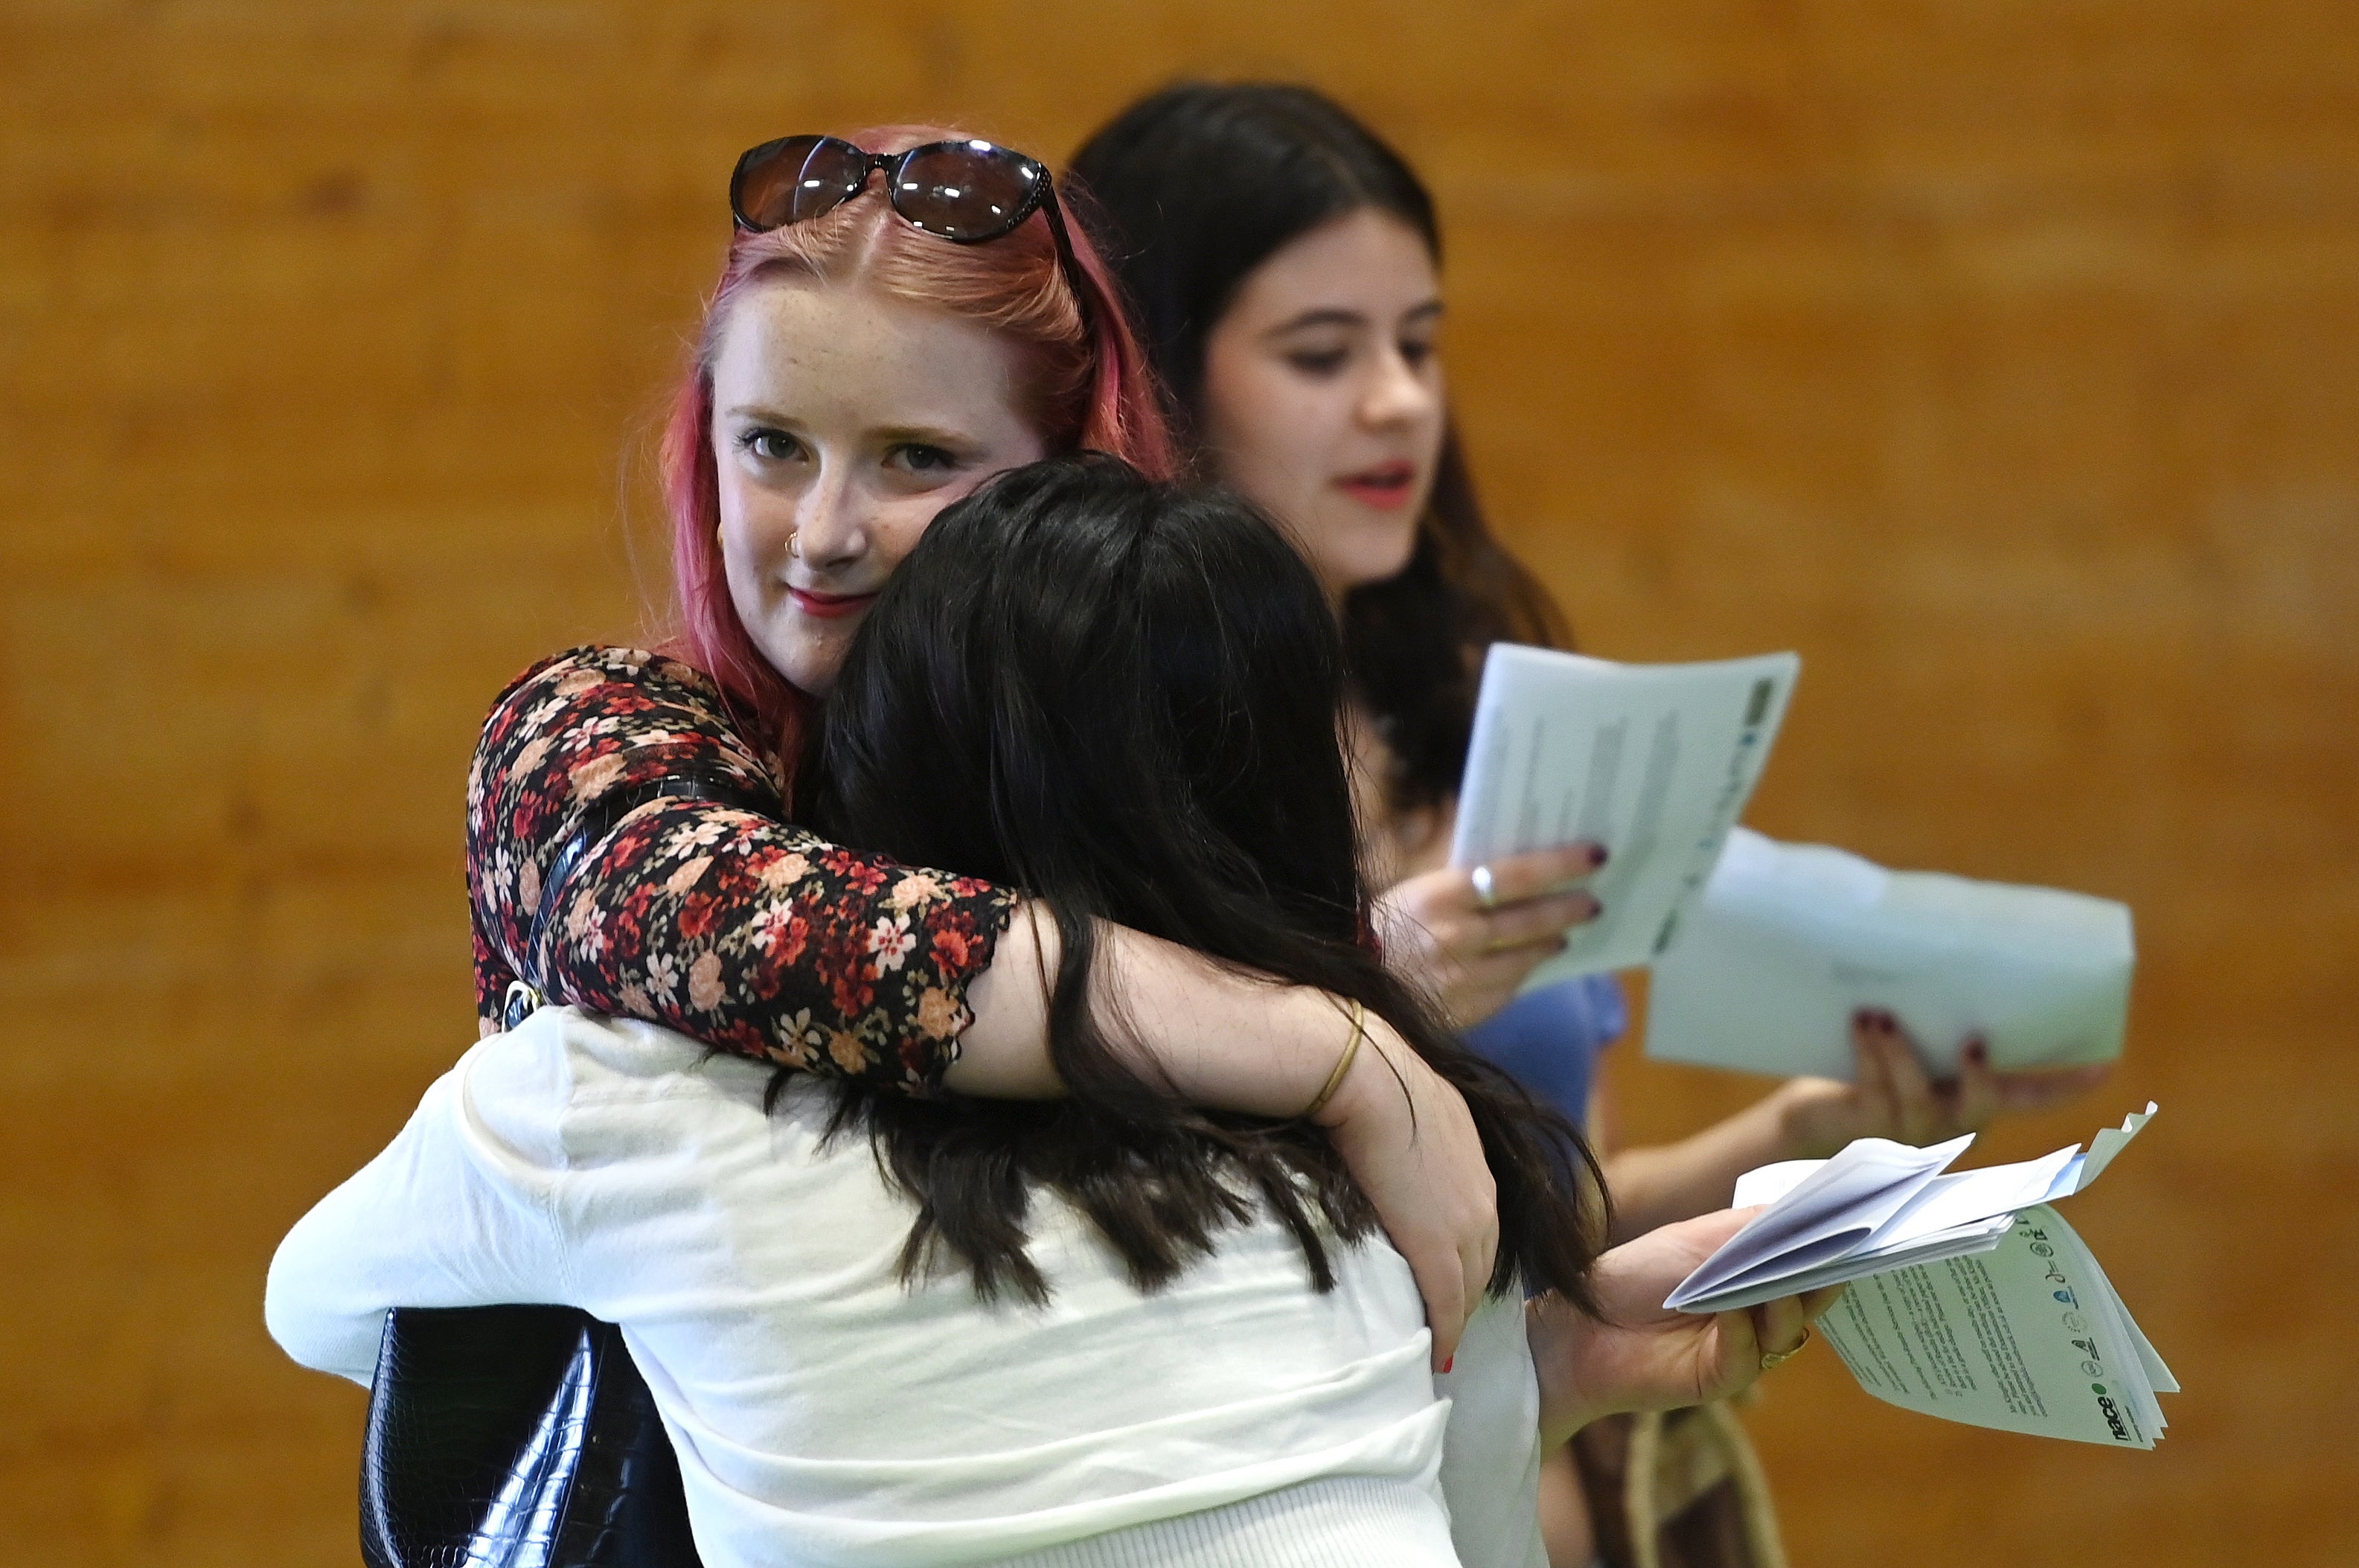 Students receive their A-level results at a school in London this month